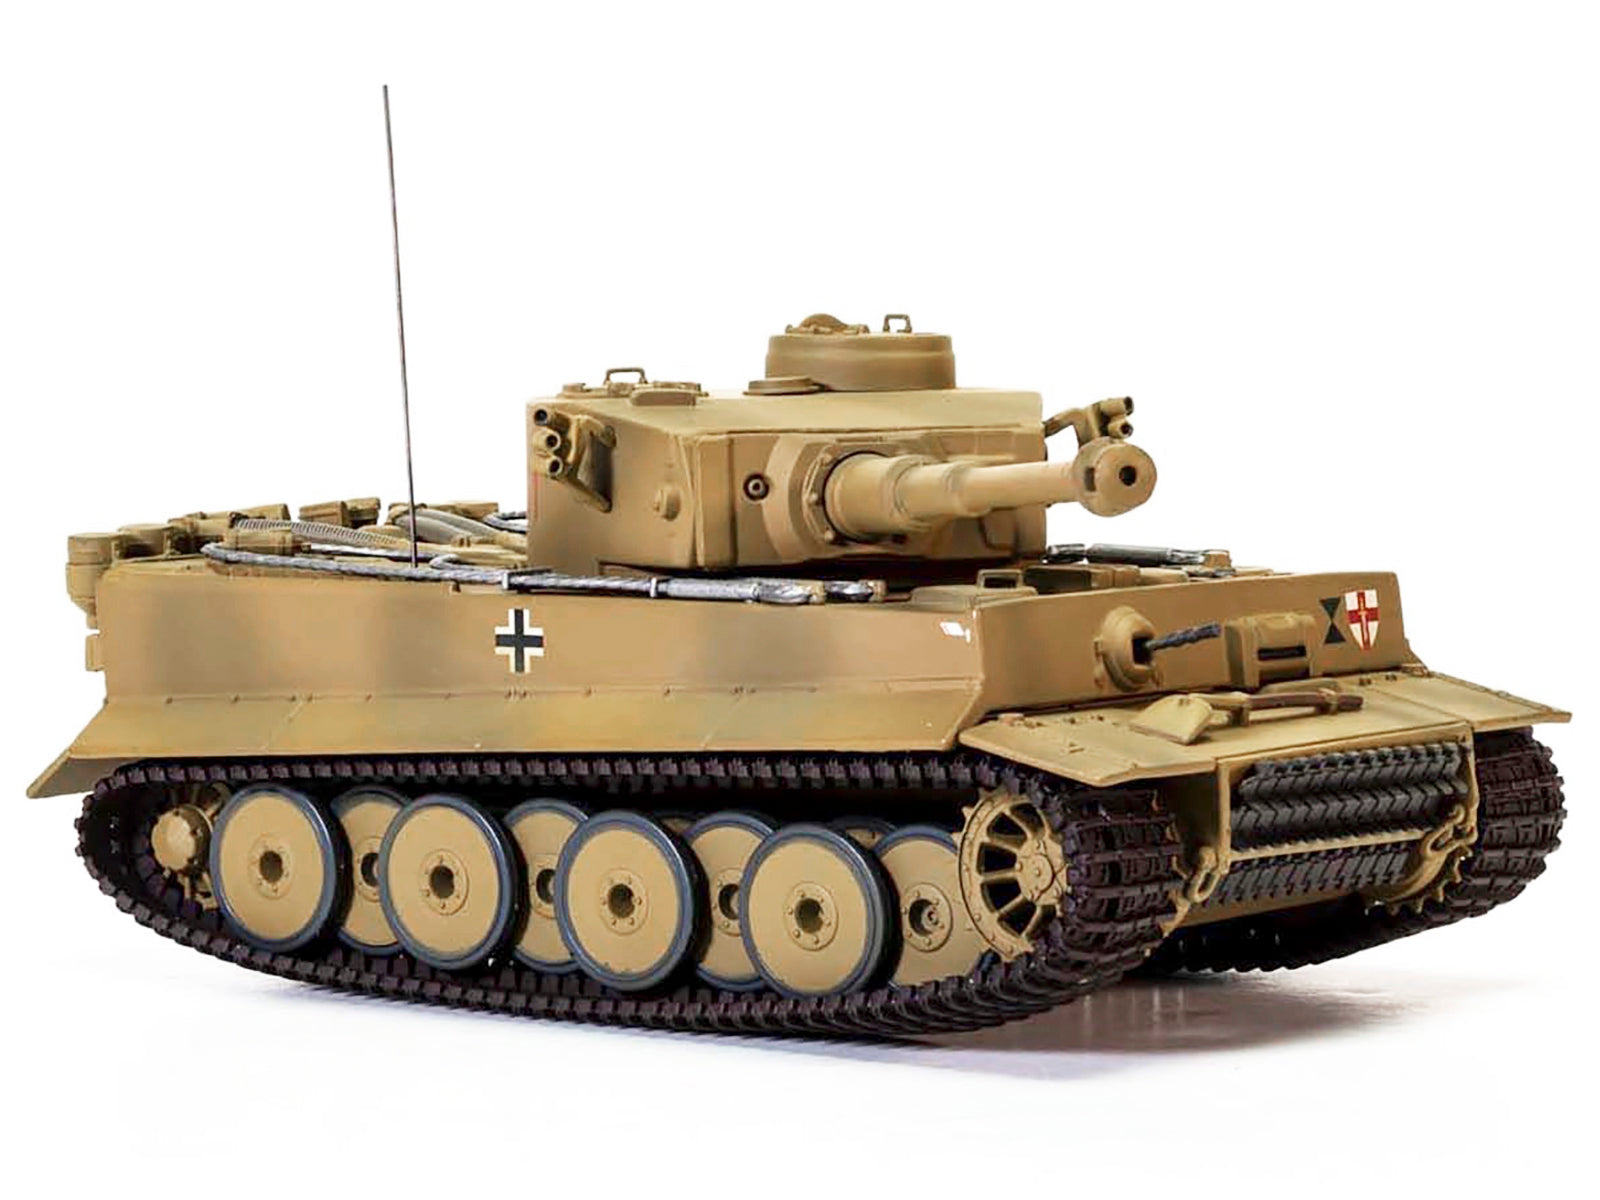 Panzerkampfwagen VI Tiger Ausf E "Tiger 131" Heavy Tank (Early production) "Displayed on Horse Guards Parade London" Limited Edition to 600 pieces Worldwide 1/50 Diecast Model by Corgi